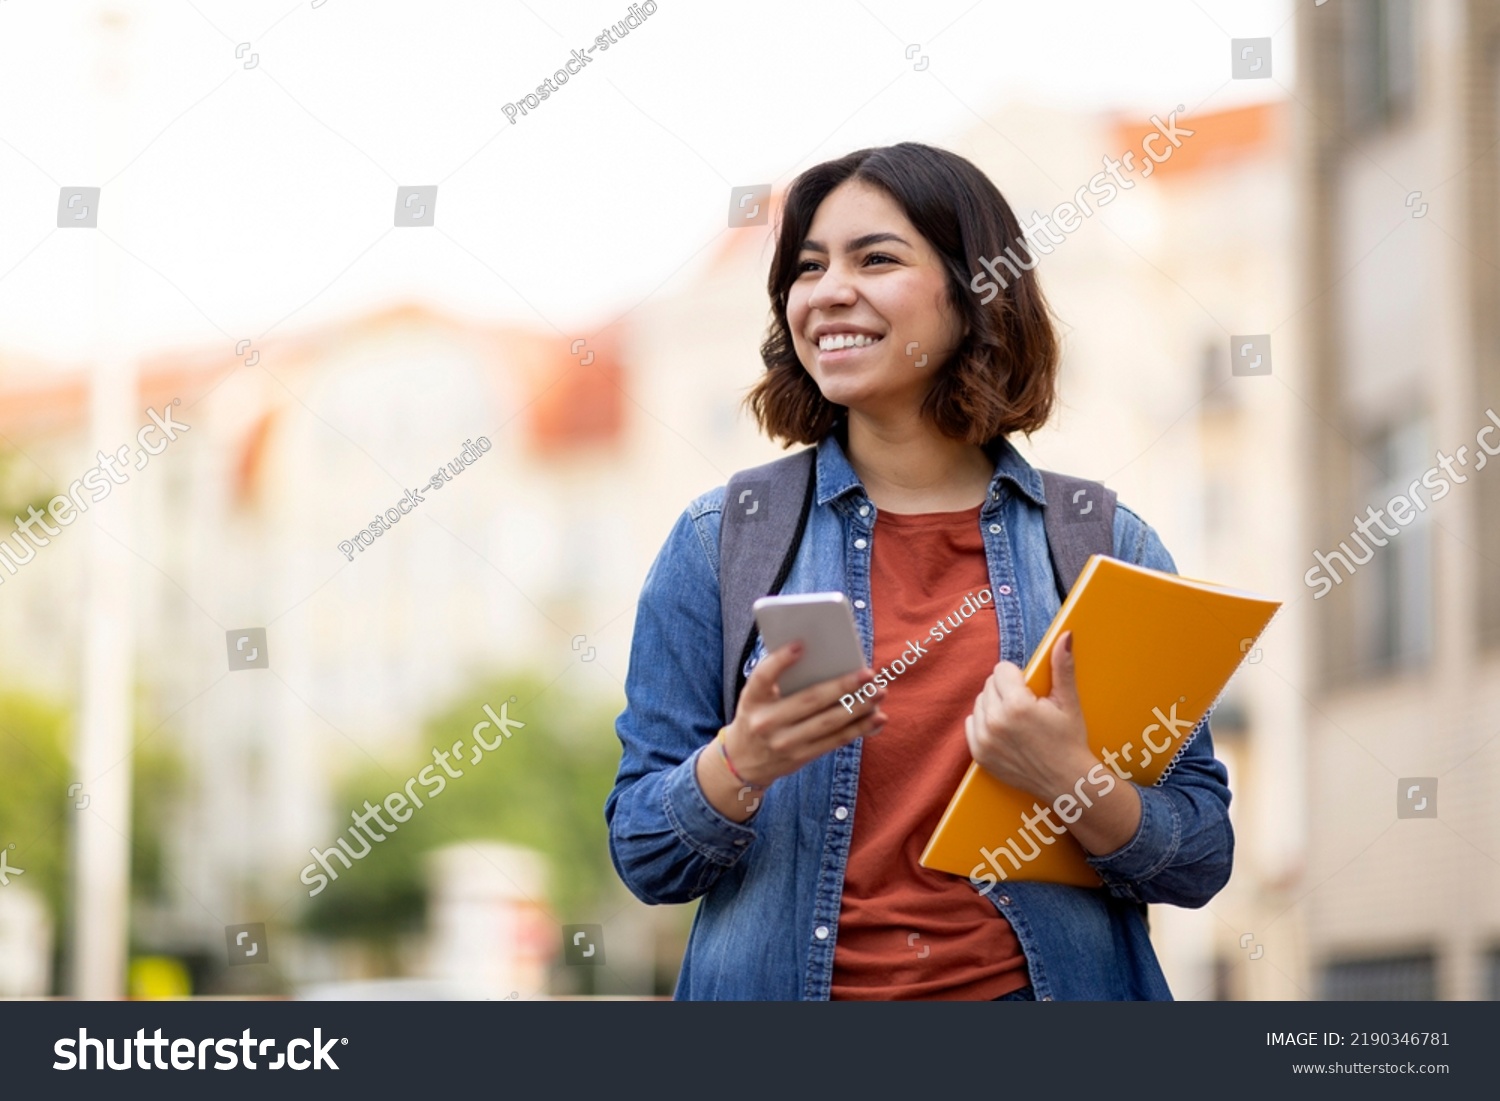 Cheerful Arab Female Student With Smartphone And Workbooks Standing Outdoors, Happy Young Middle Eastern Woman Walking In City After College Classes, Looking Away And Smiling, Copy Space #2190346781